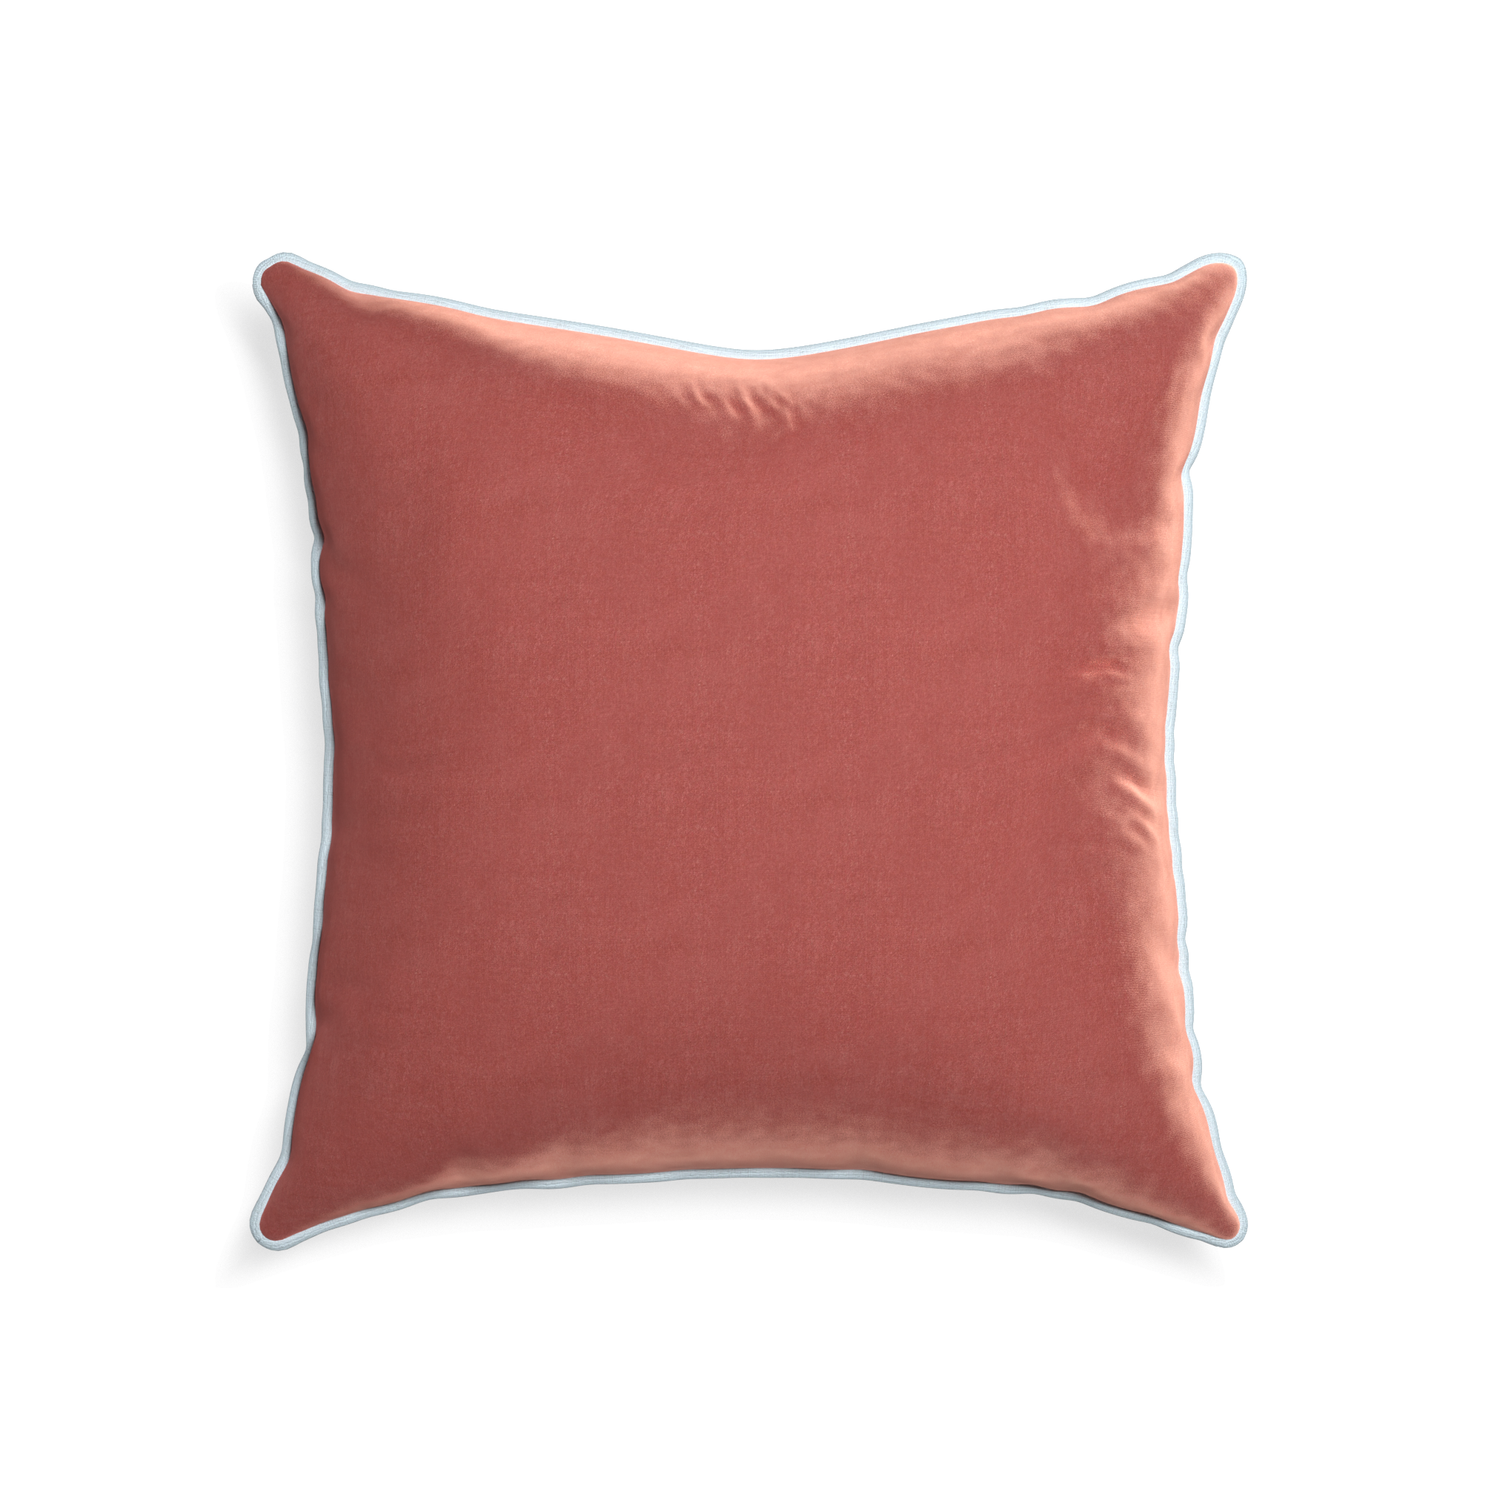 square coral velvet pillow with light blue piping